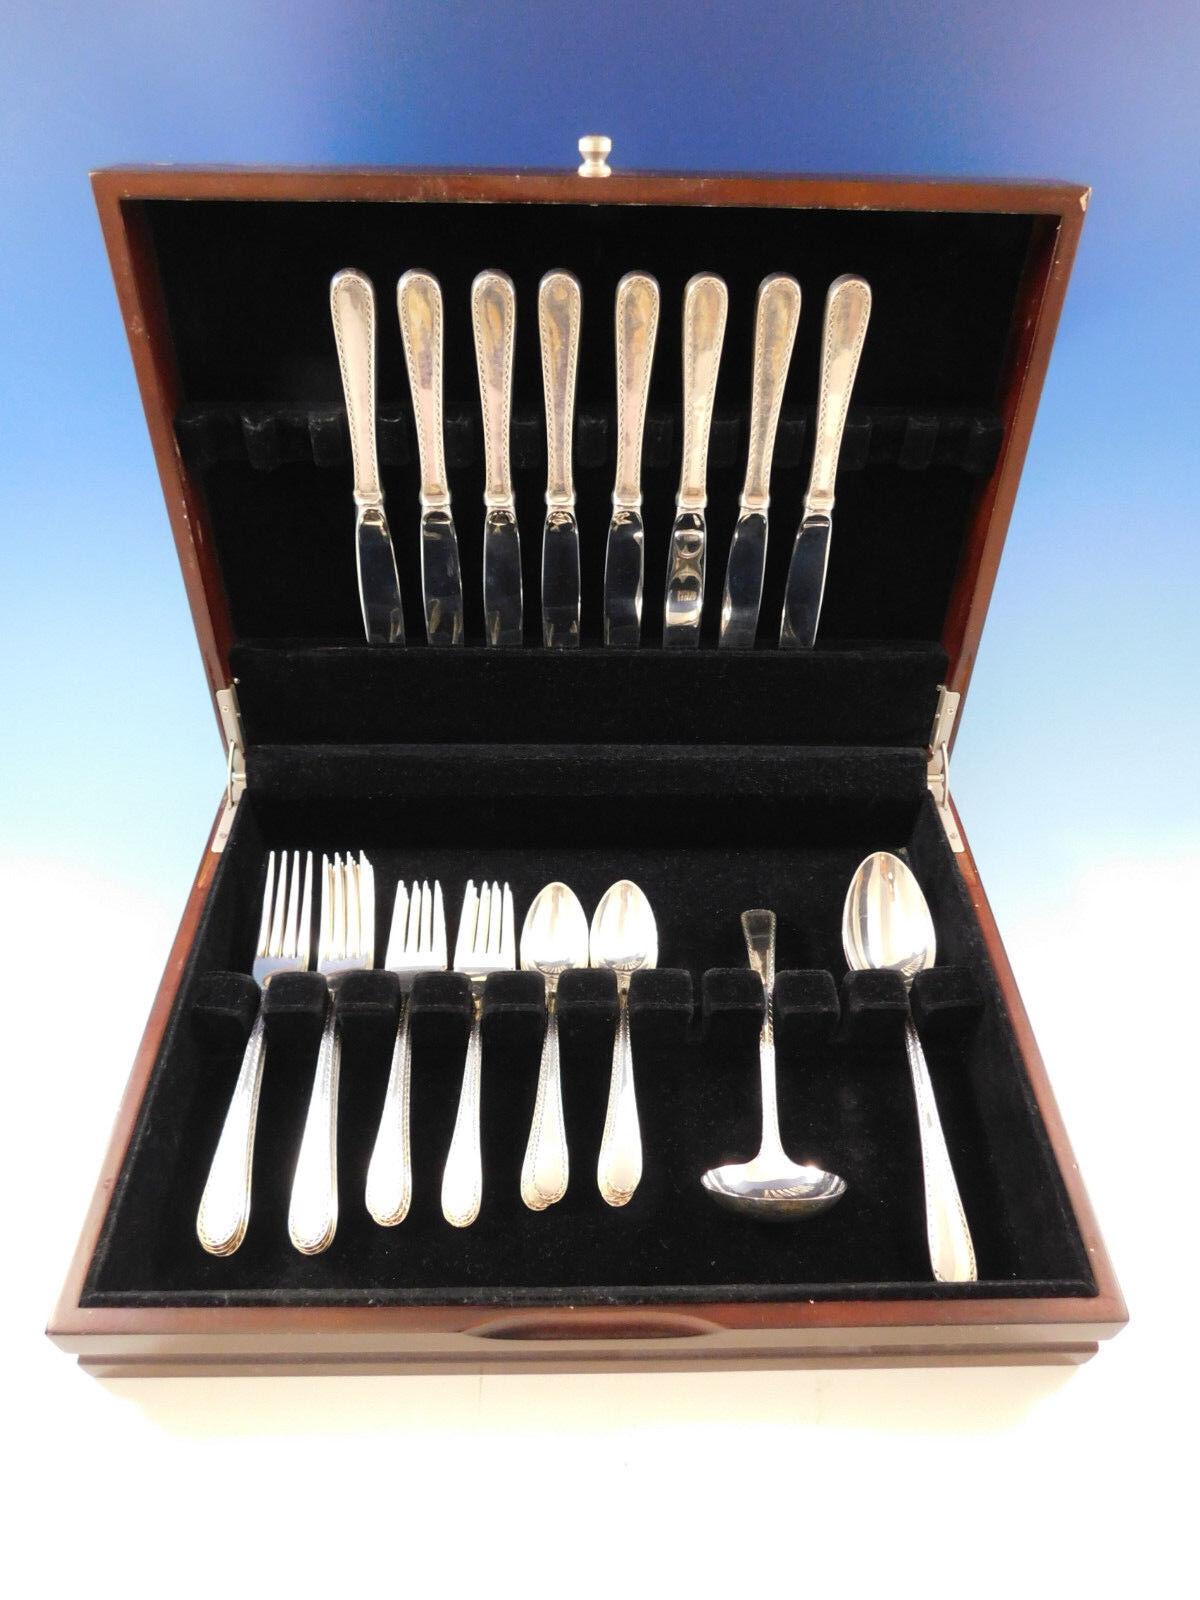 Gorgeous Winslow by Kirk Sterling Silver Flatware set, 35 pieces. This set includes:

8 Knives, 9